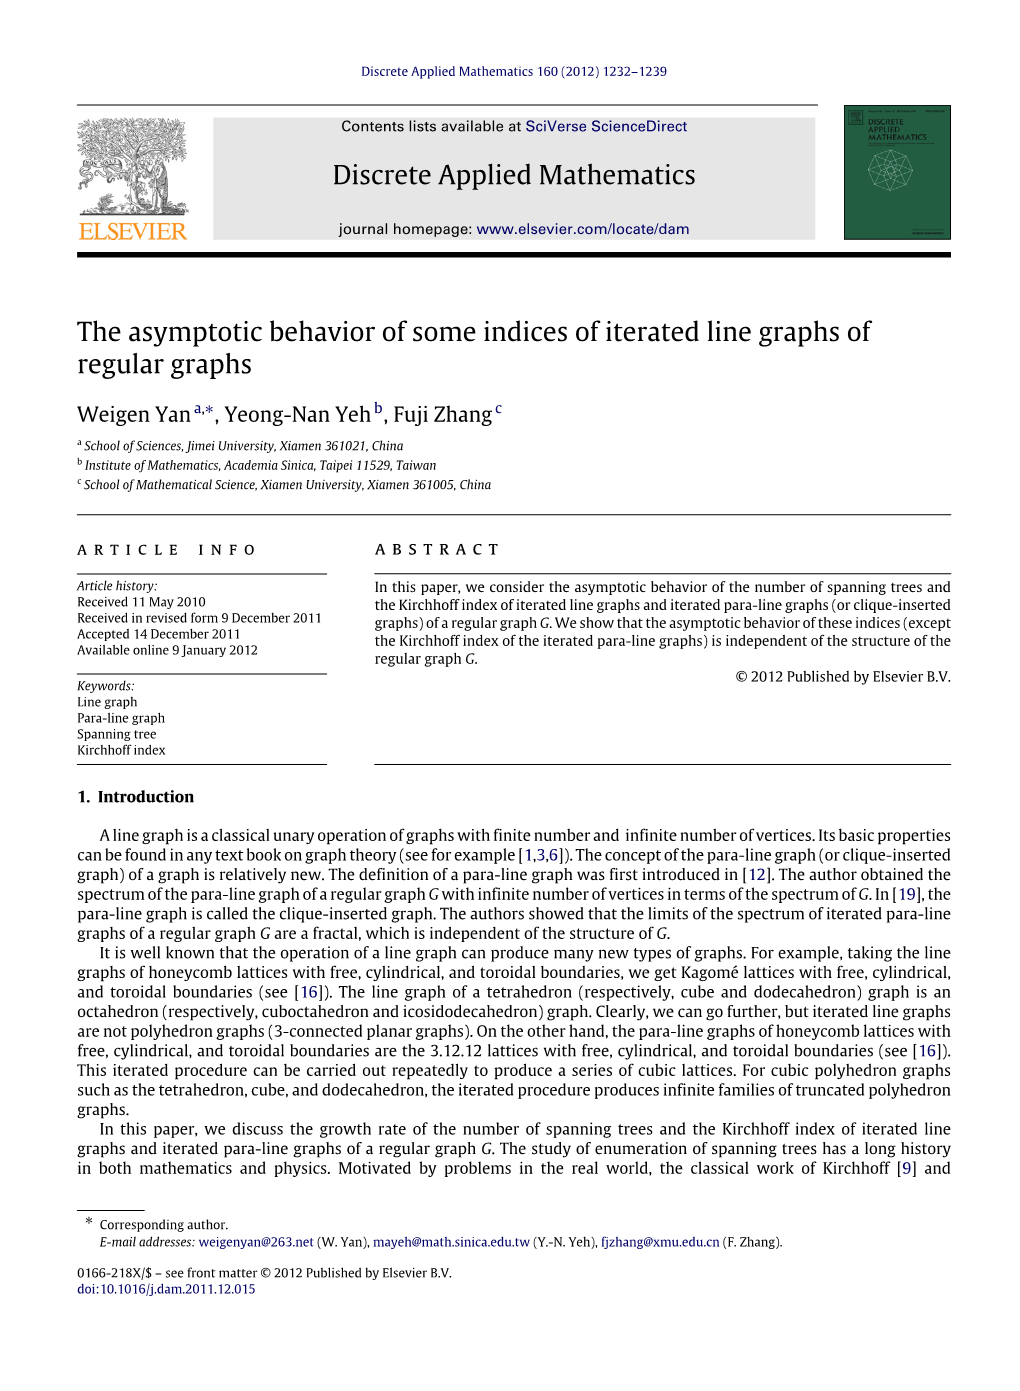 The Asymptotic Behavior of Some Indices of Iterated Line Graphs of Regular Graphs